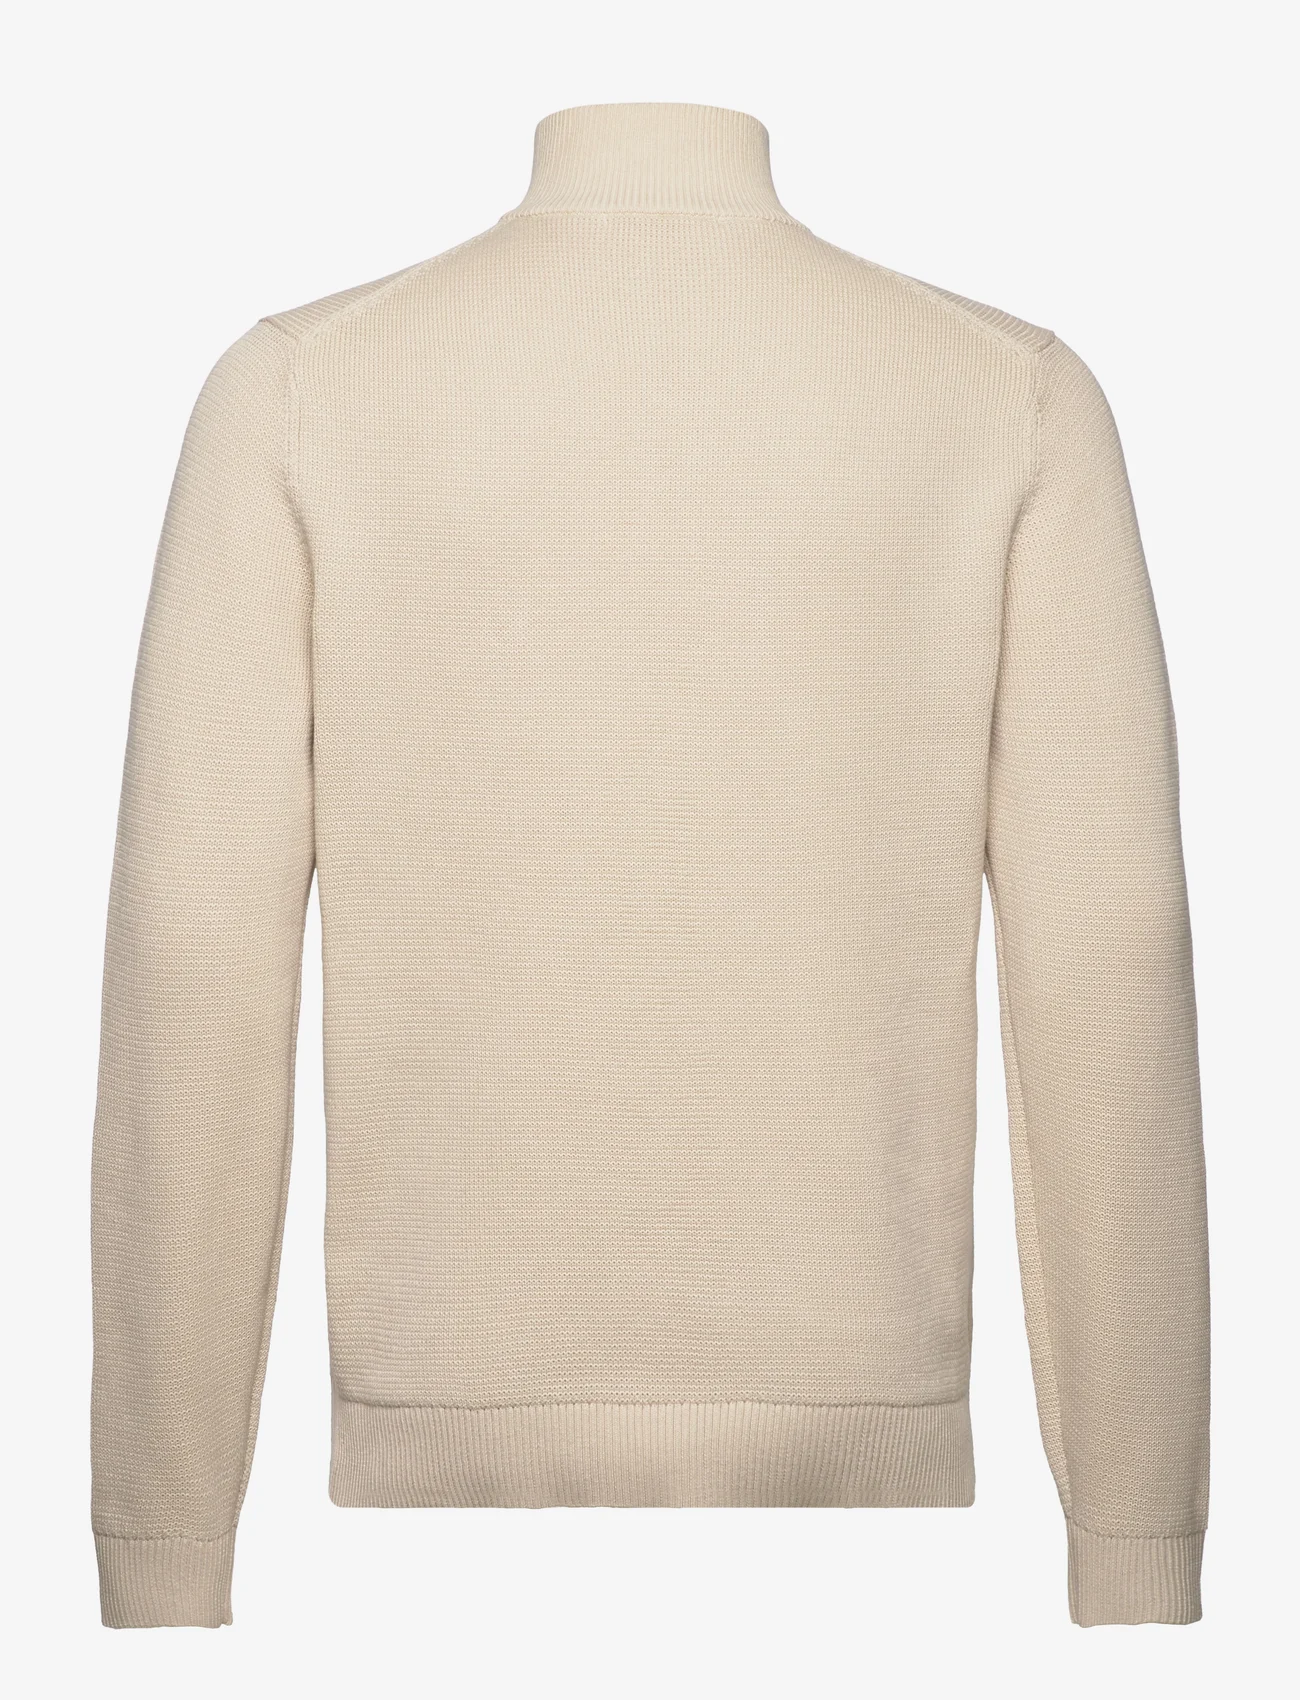 Selected Homme - SLHDANE LS KNIT STRUCTURE HALF ZIP NOOS - mænd - oatmeal - 1